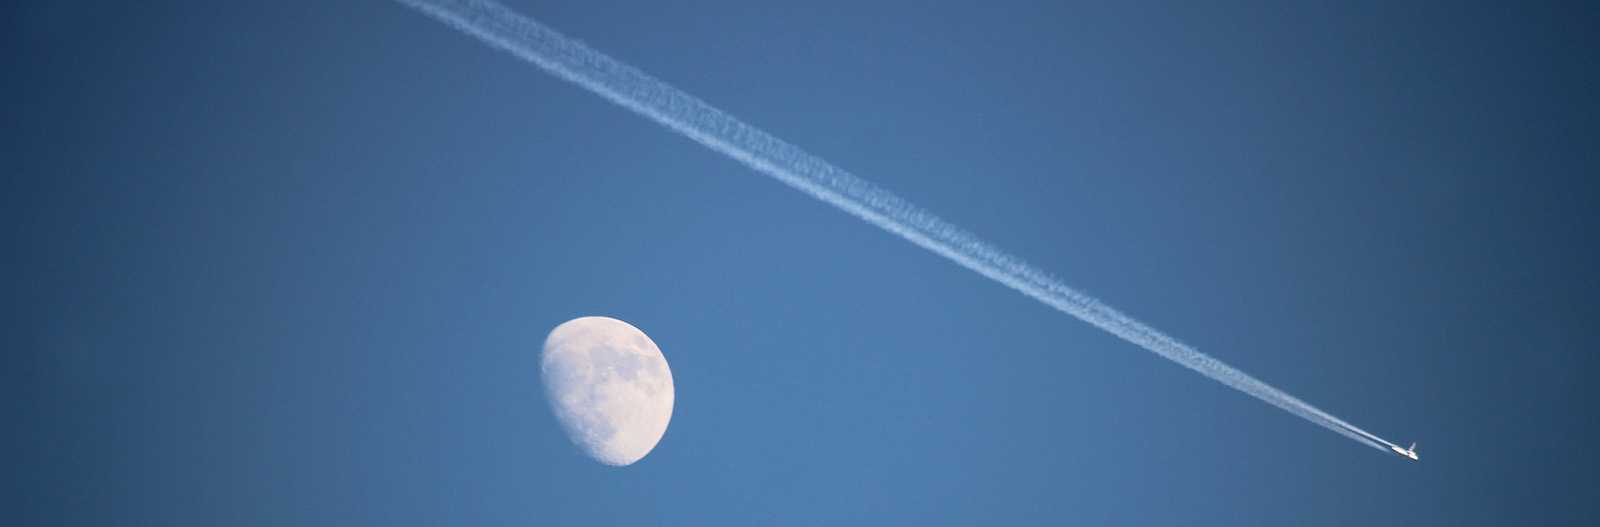 contrails with a moon in the background